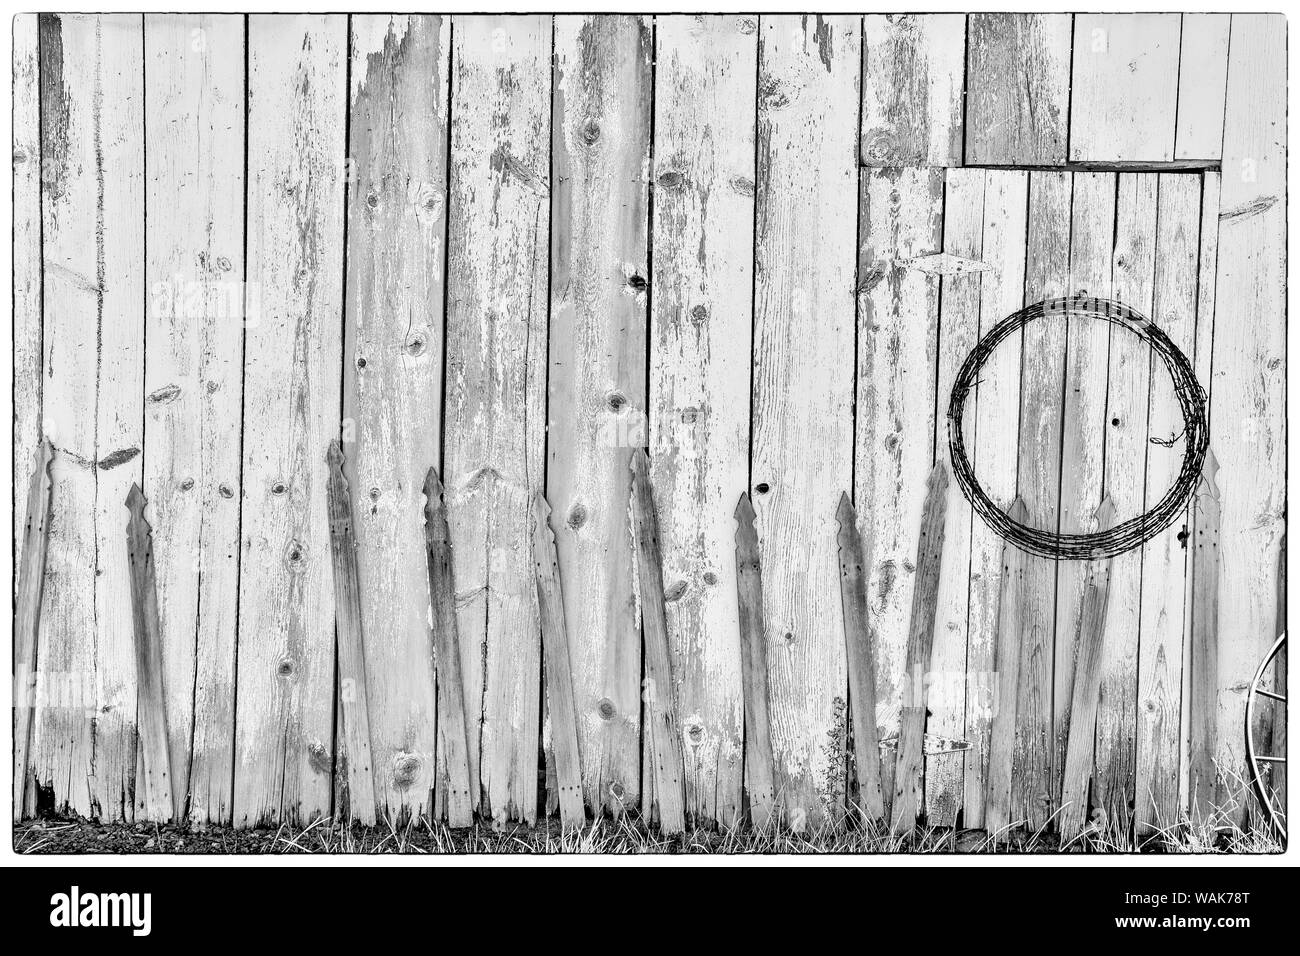 Black and White image of old wooden shed with hanging barbwire, Benge, Washington State Stock Photo